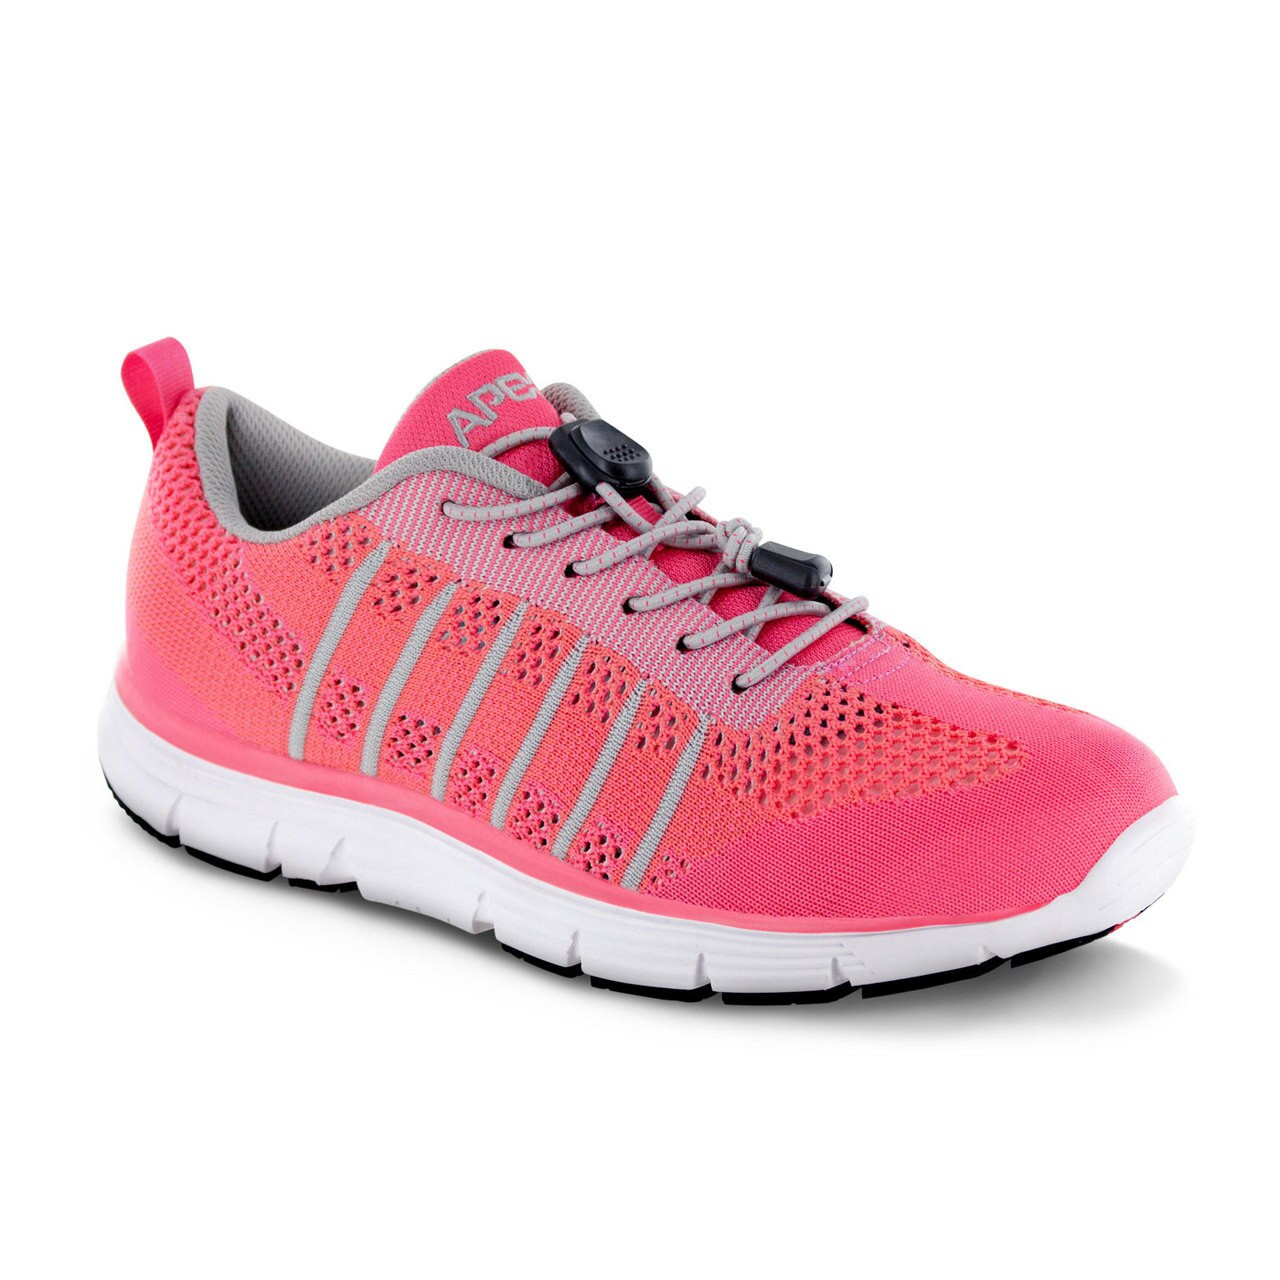 Women's Comfortable Athletic Knit Shoes 